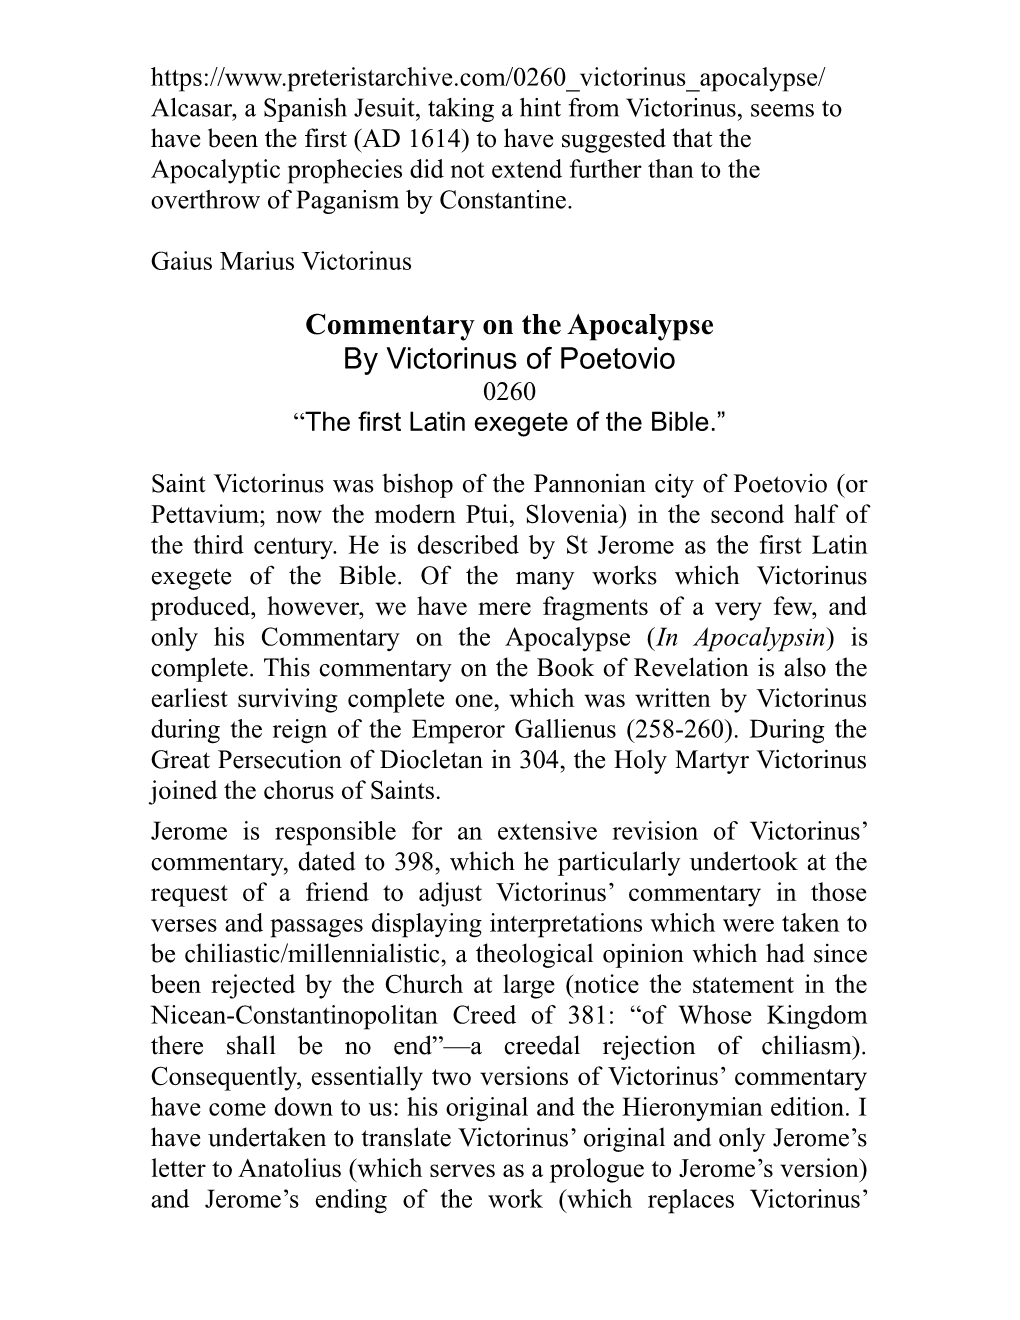 Commentary on the Apocalypse by Victorinus of Poetovio 0260 “The First Latin Exegete of the Bible.”